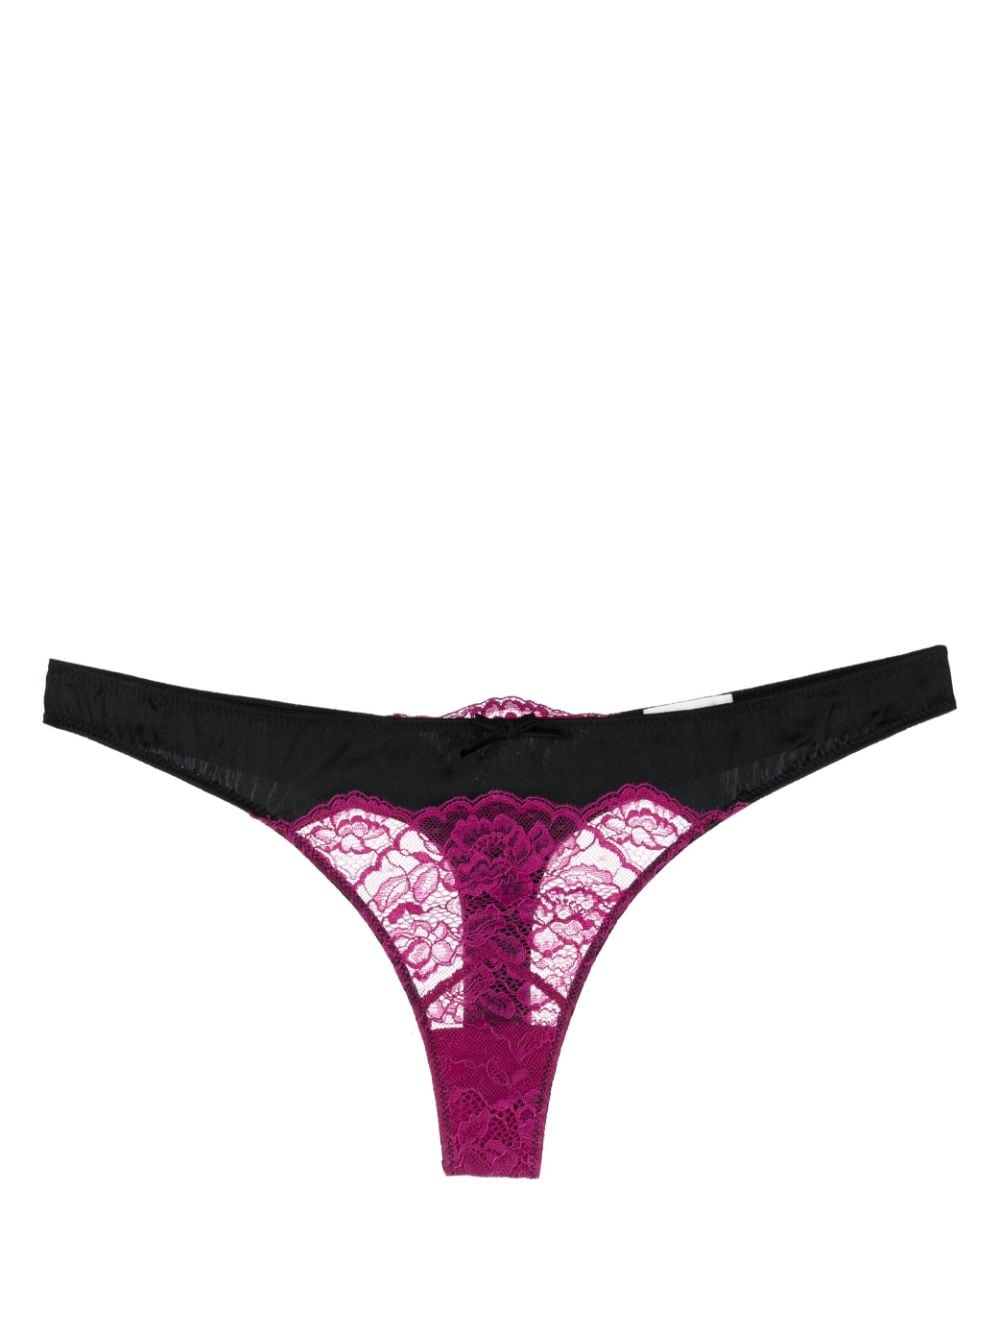 Roxy floral embroidery thong